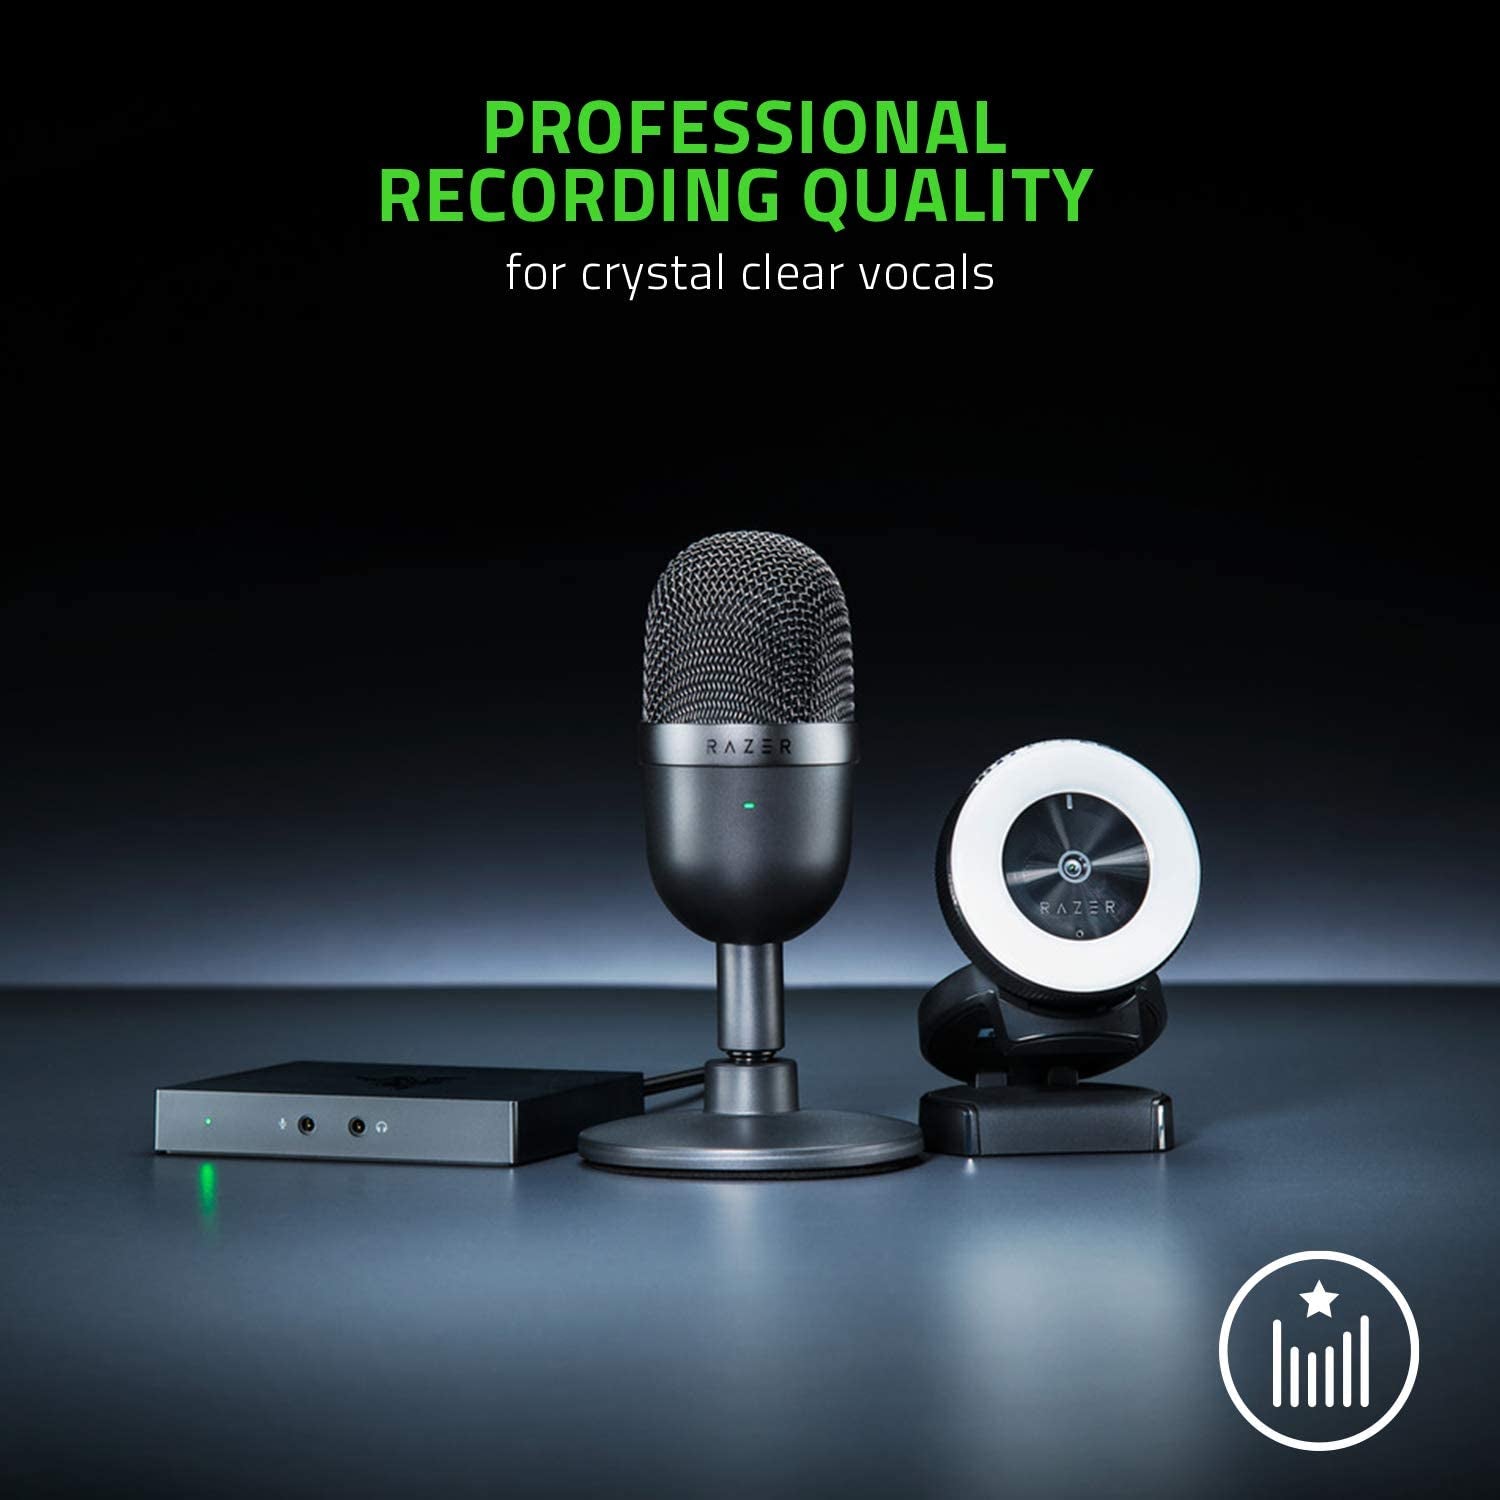 Seiren Mini USB Streaming Microphone: Precise Supercardioid Pickup Pattern - Professional Recording Quality - Ultra-Compact Build - Heavy-Duty Tilting Stand - Shock Resistant - Classic Black